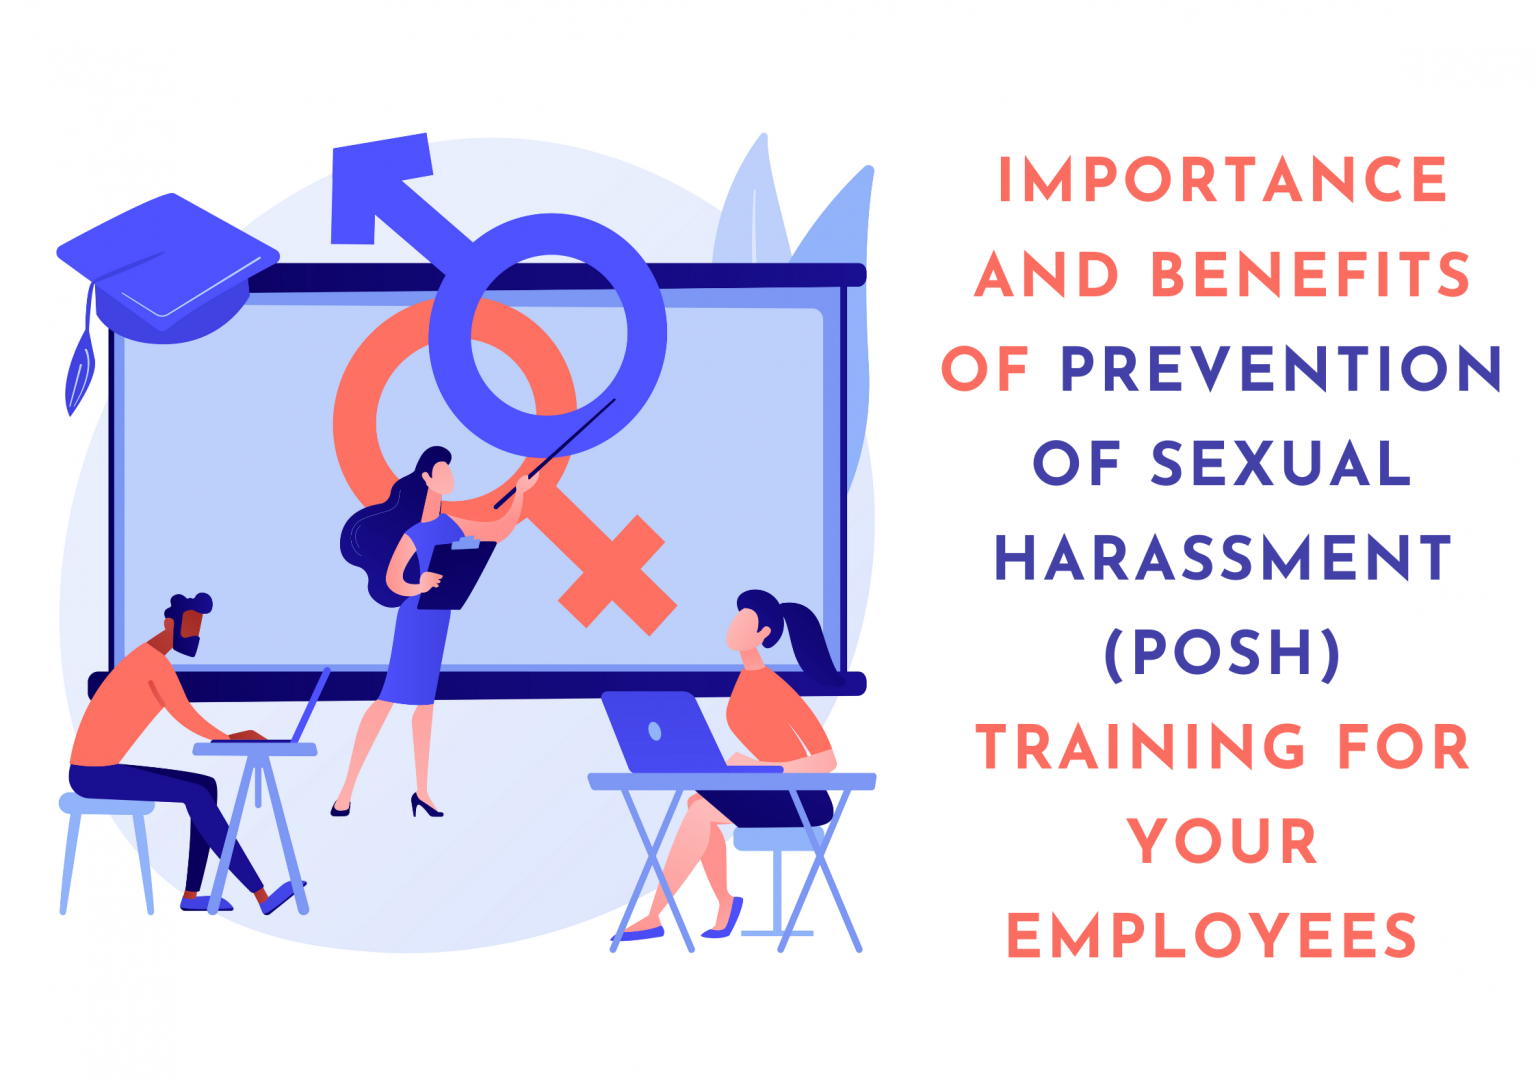 Importance And Benefits Of Prevention Of Sexual Harassment POSH Training For Your Employees 1536x1086 